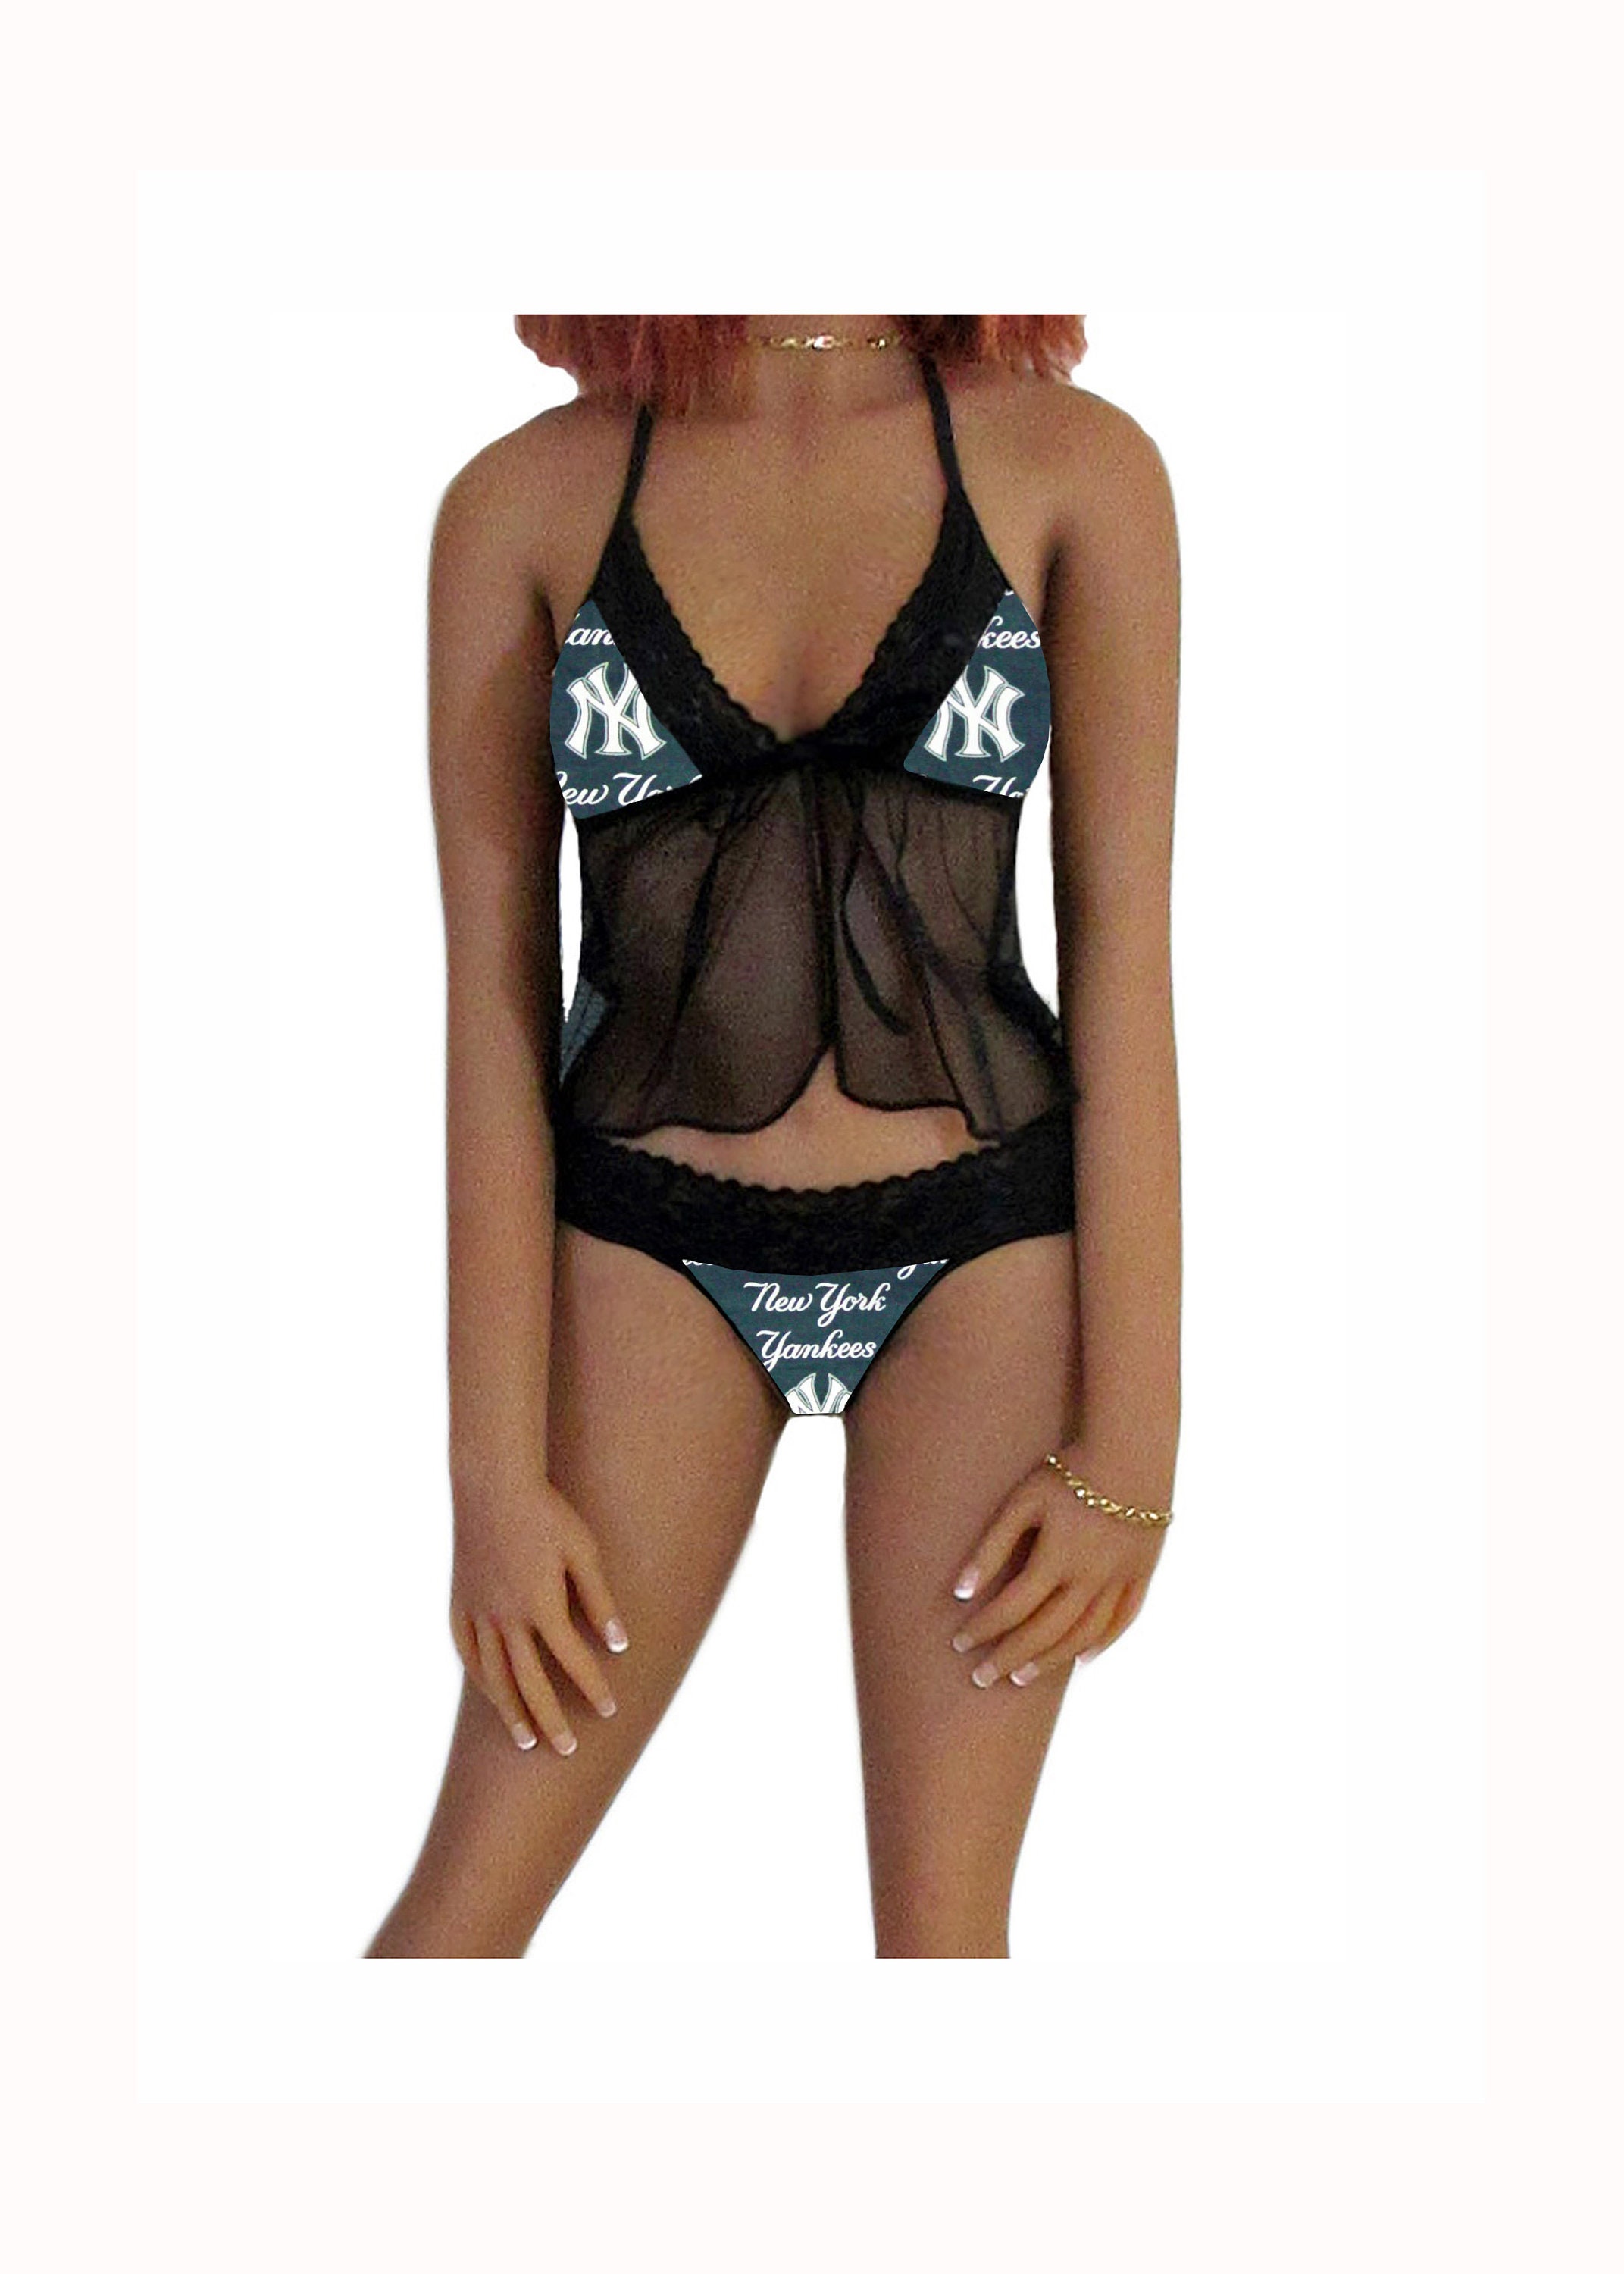 New York Yankees Lingerie Cami Top and String Thong Panty Set, X